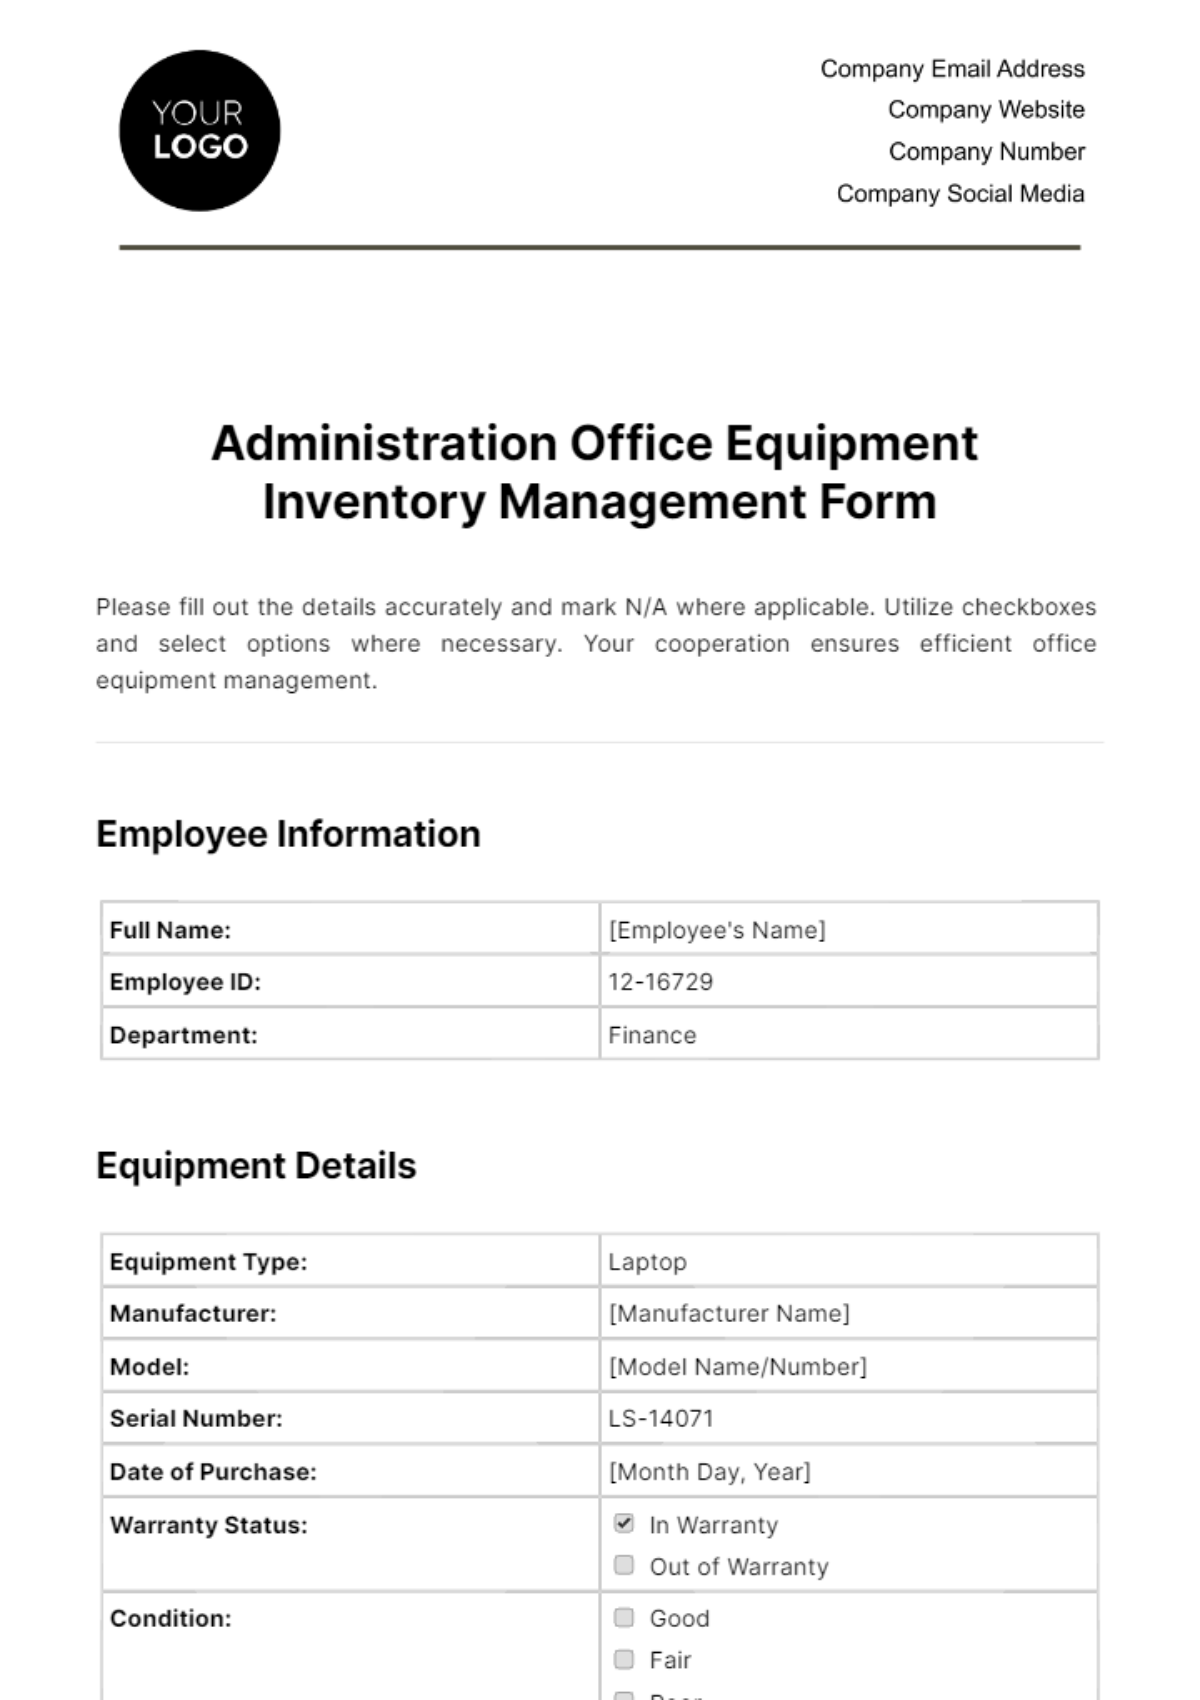 Free Administration Office Equipment Inventory Management Form Template